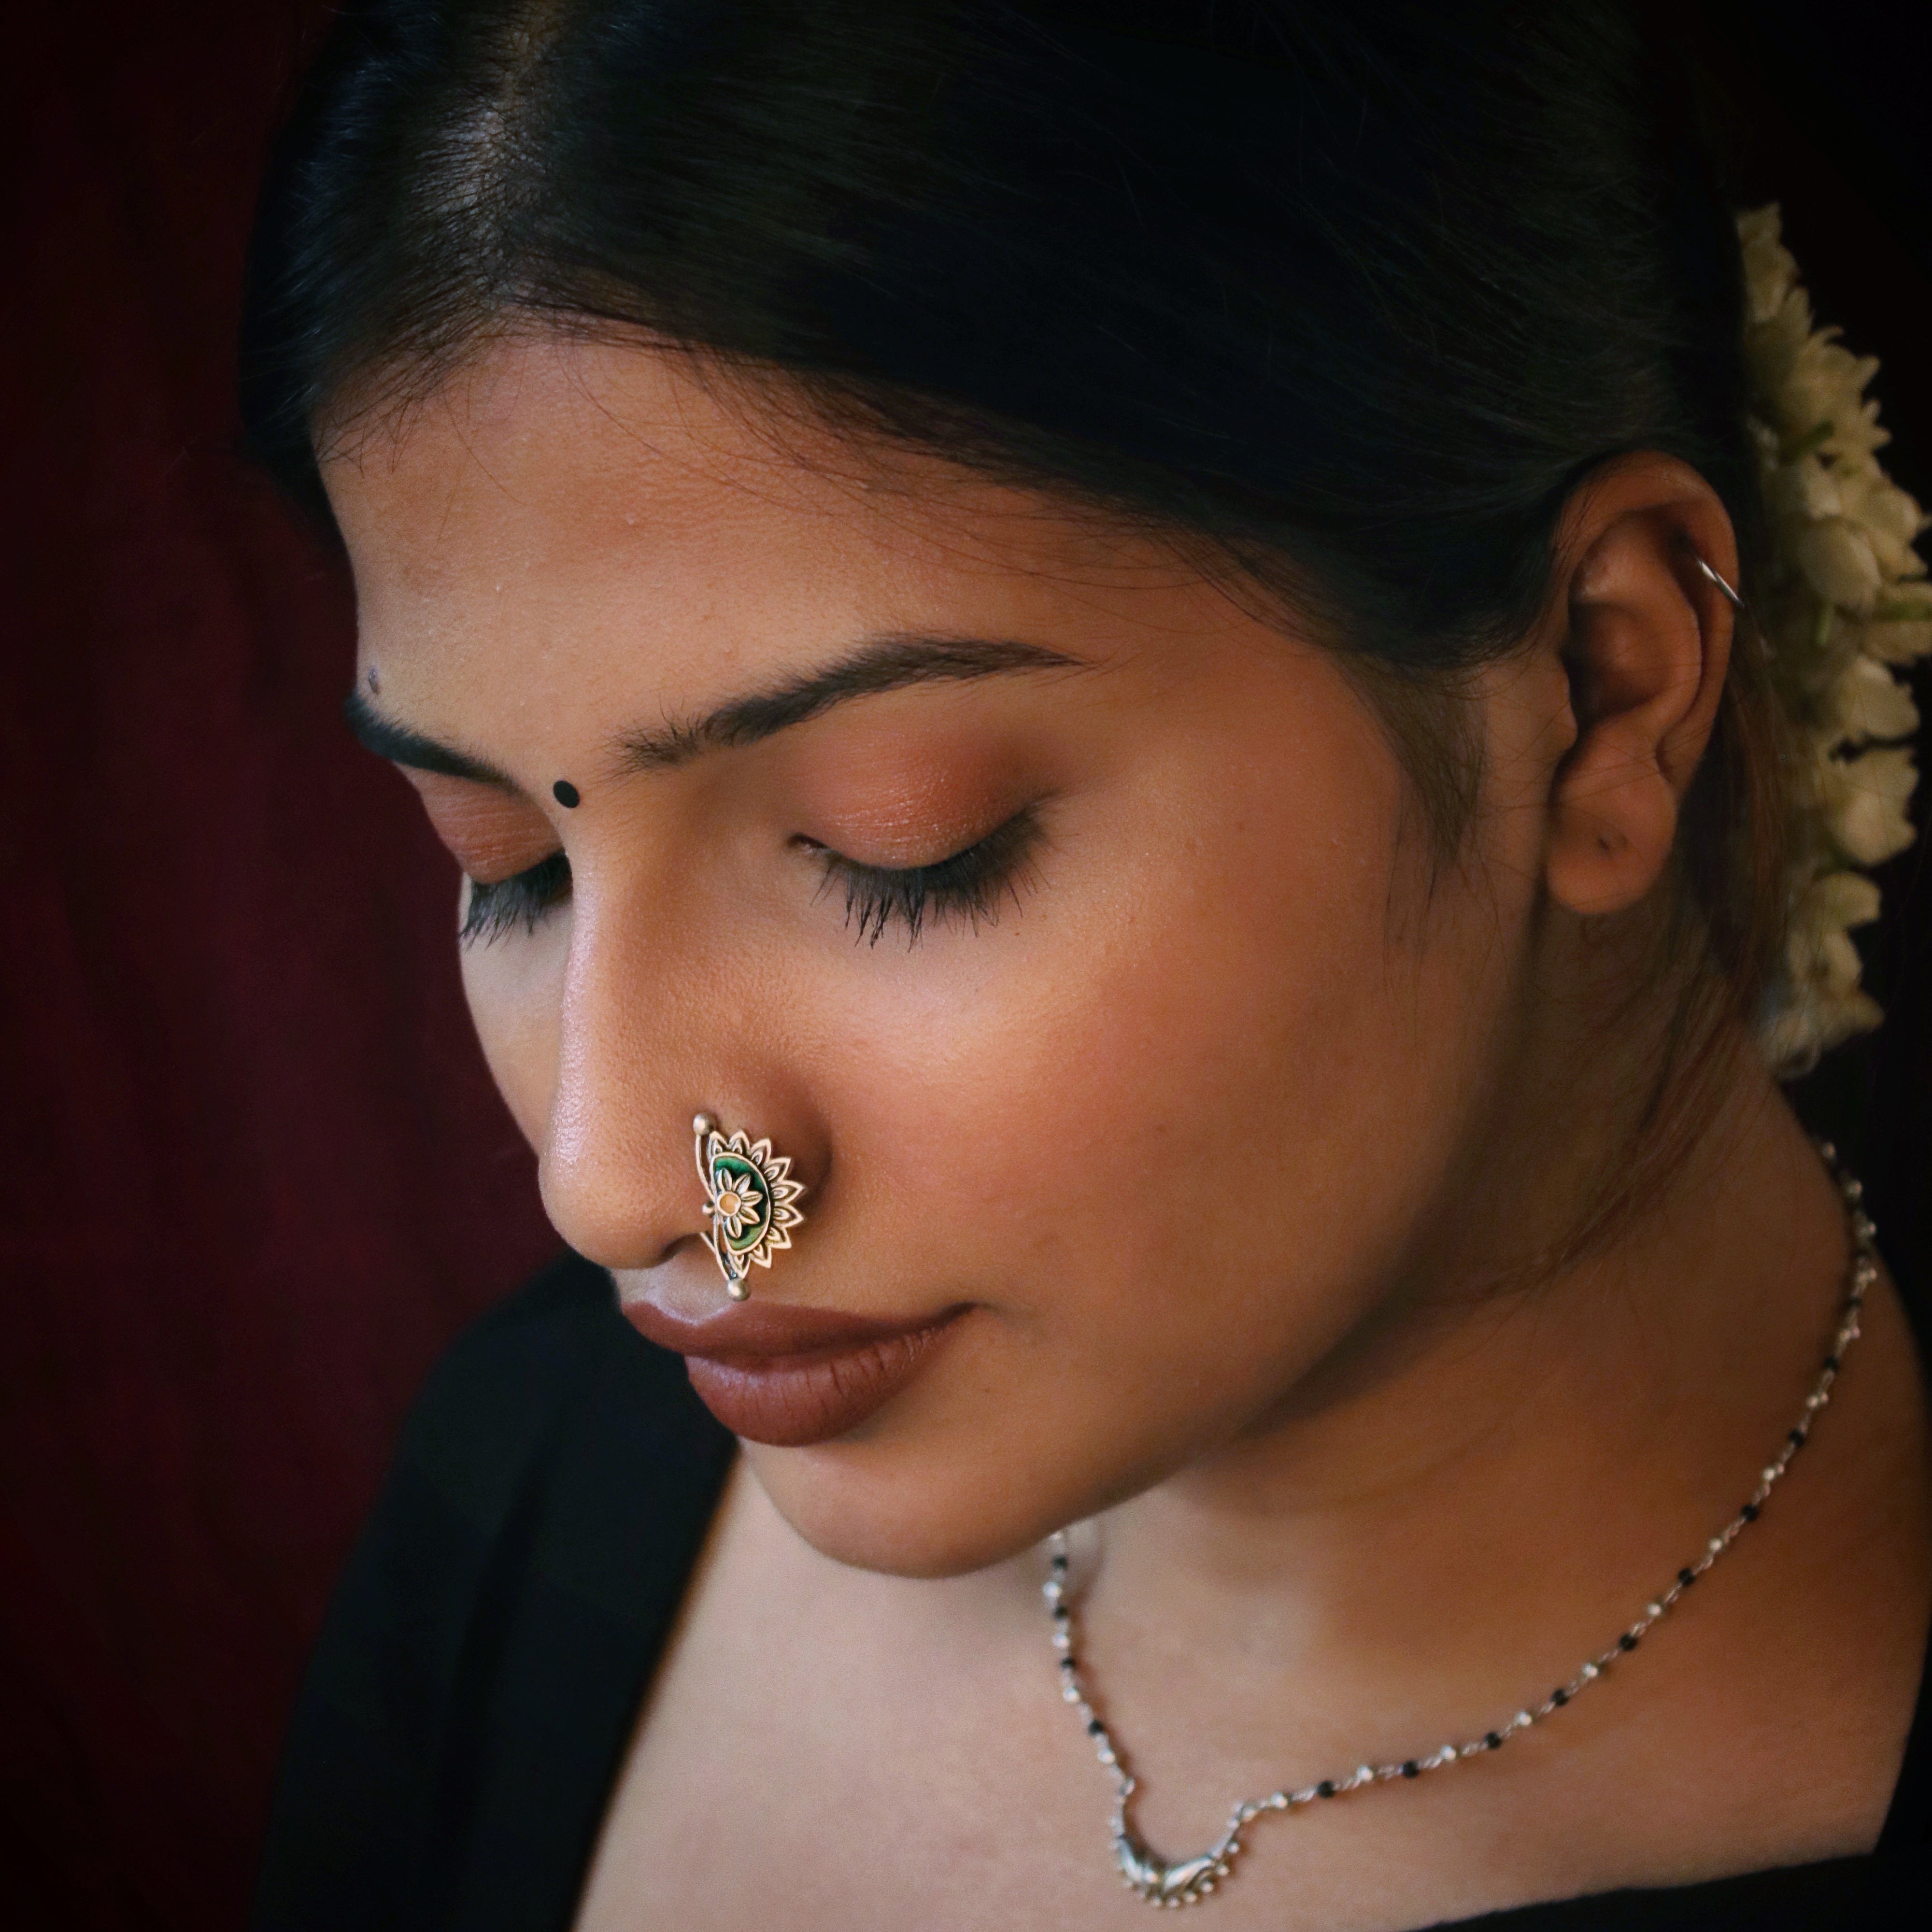 Pearl Peacock Silver Nath/ Nose Ring By Moha - Pierced Left